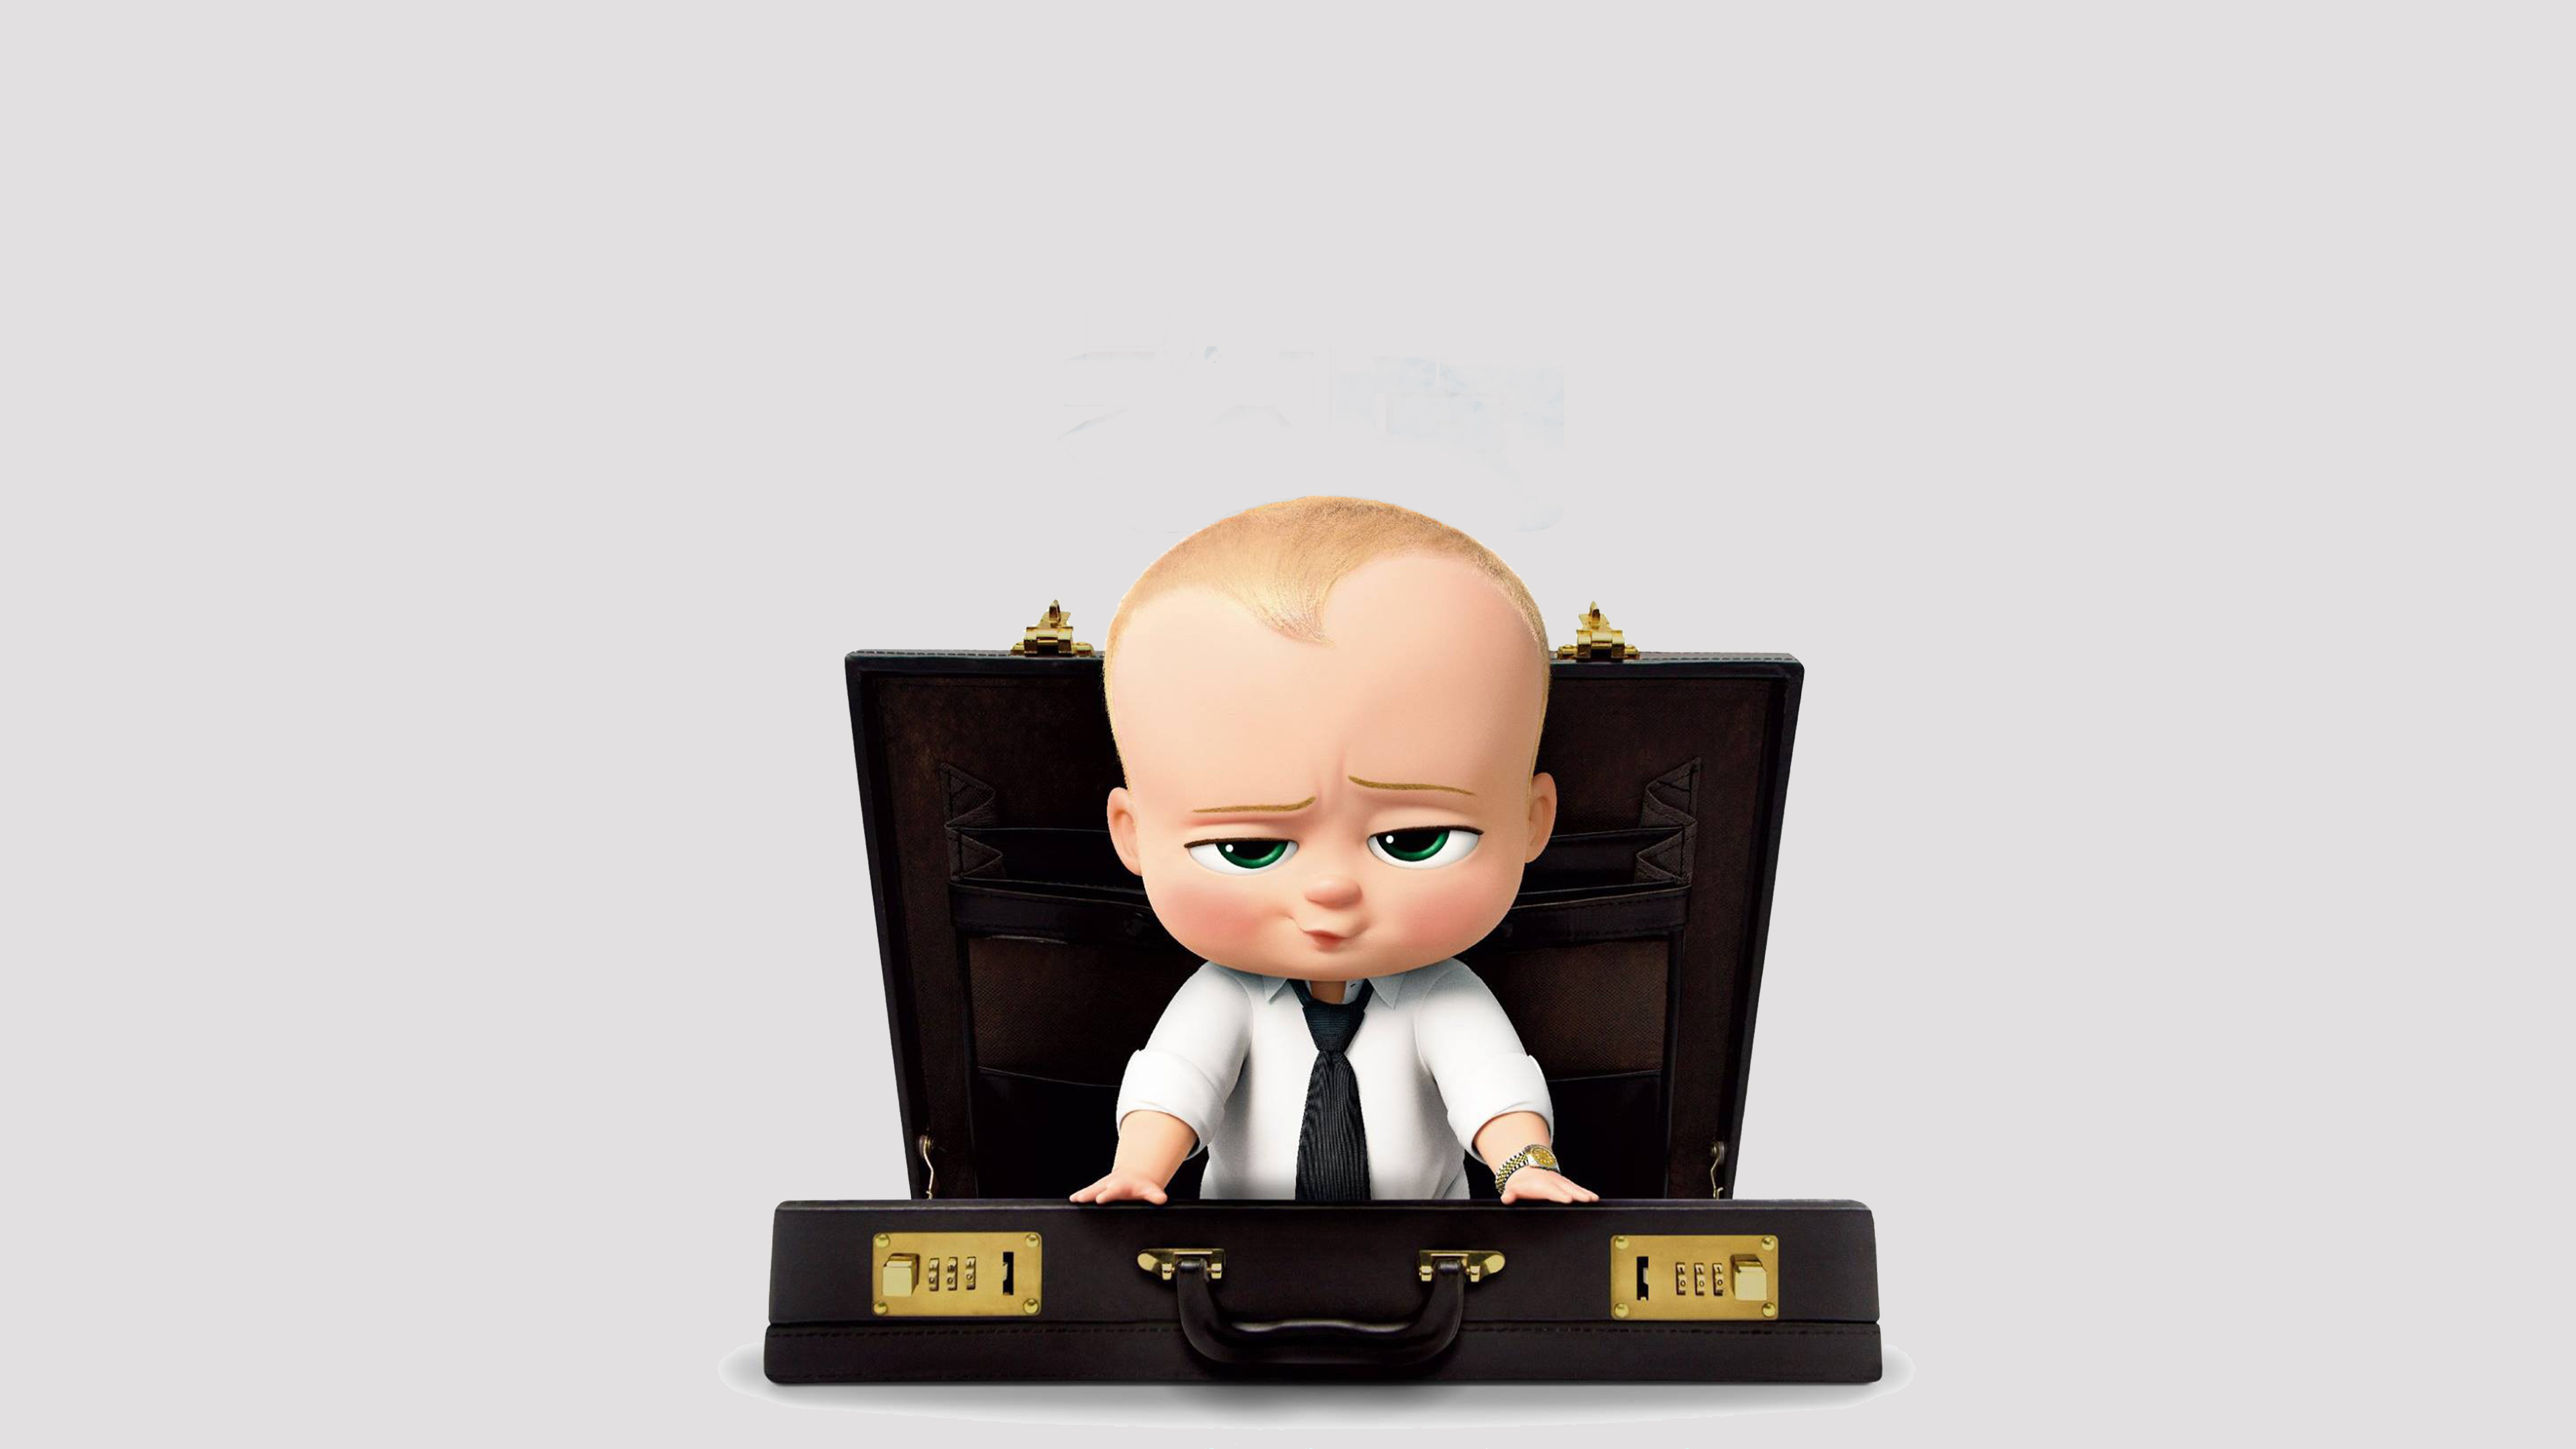 the boss baby animated movie 2017 1536400671 - The Boss Baby Animated Movie 2017 - the boss baby wallpapers, hd-wallpapers, animated movies wallpapers, 4k-wallpapers, 2017 movies wallpapers